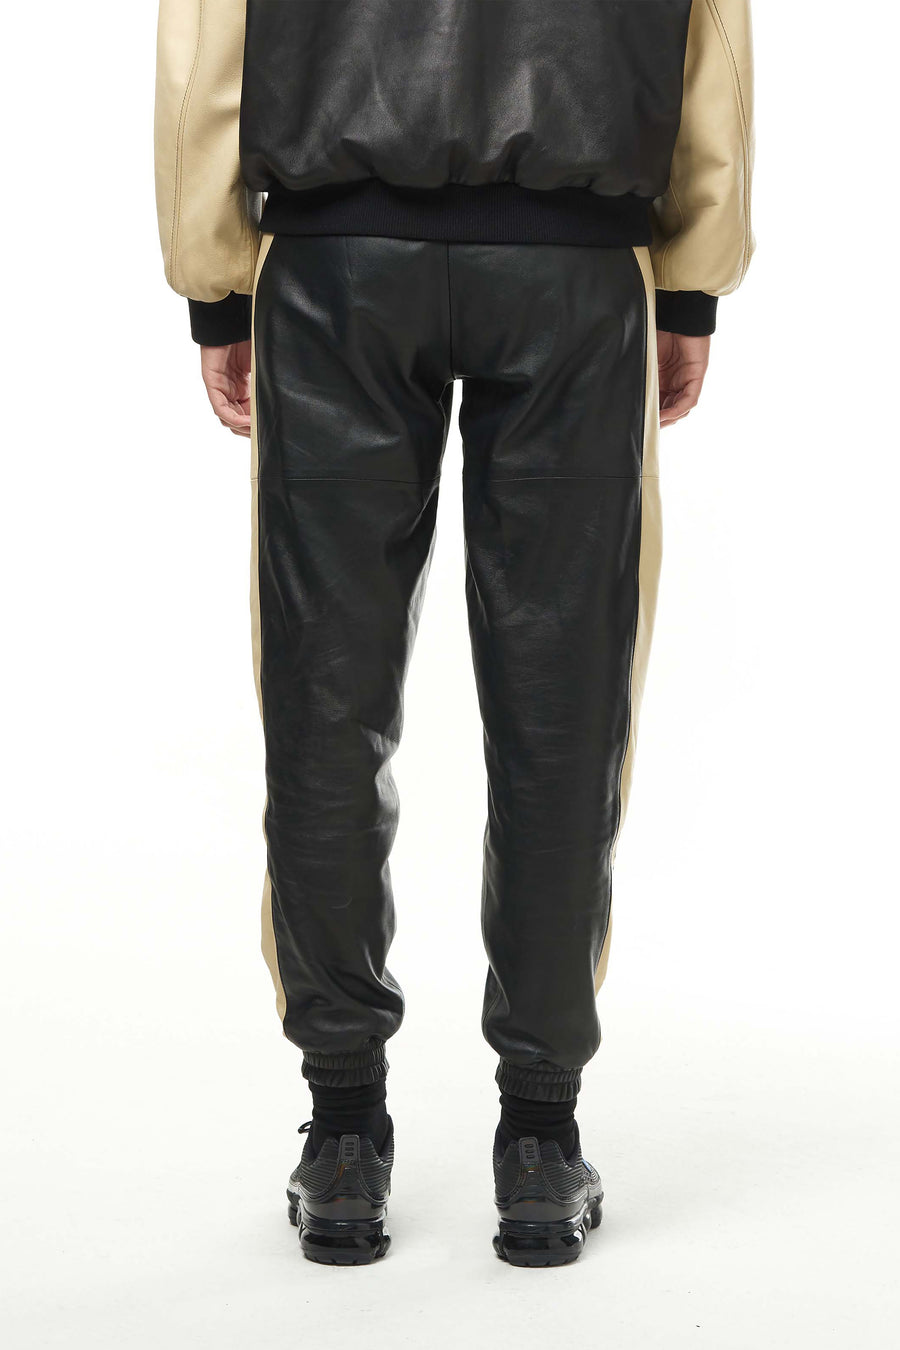 THE VIRALIZER UNISEX LEATHER TRACKSUIT BOTTOMS IN BLACK AND CREAM